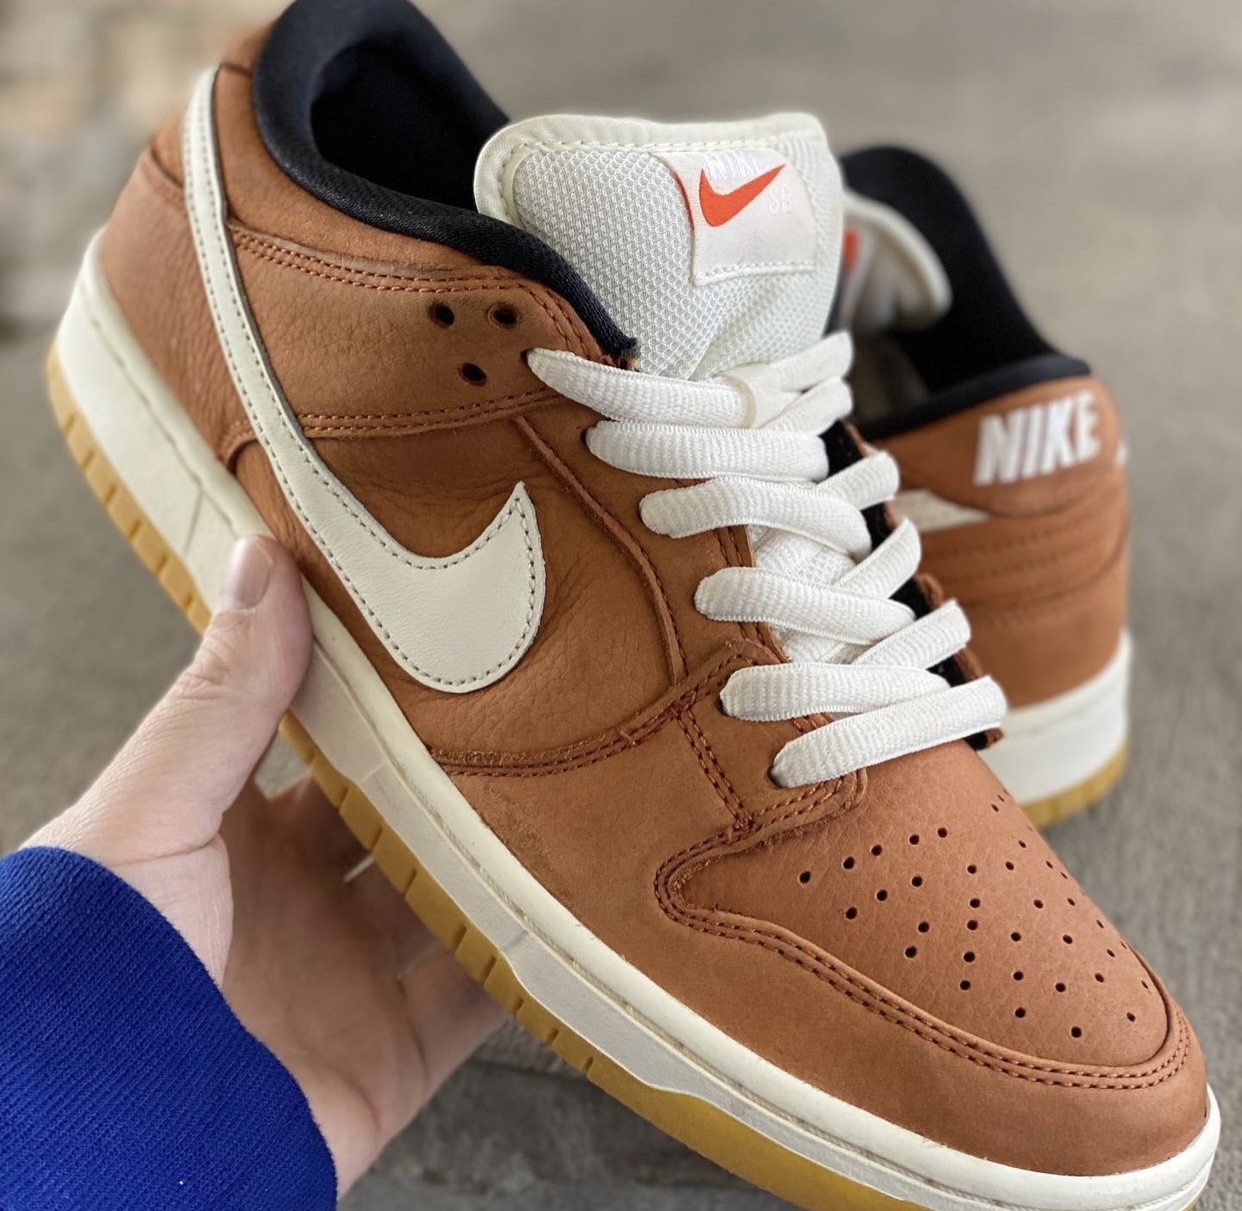 Nike SB Dunk Low Dark Russet DH1319 200 Release Date Pricing 1